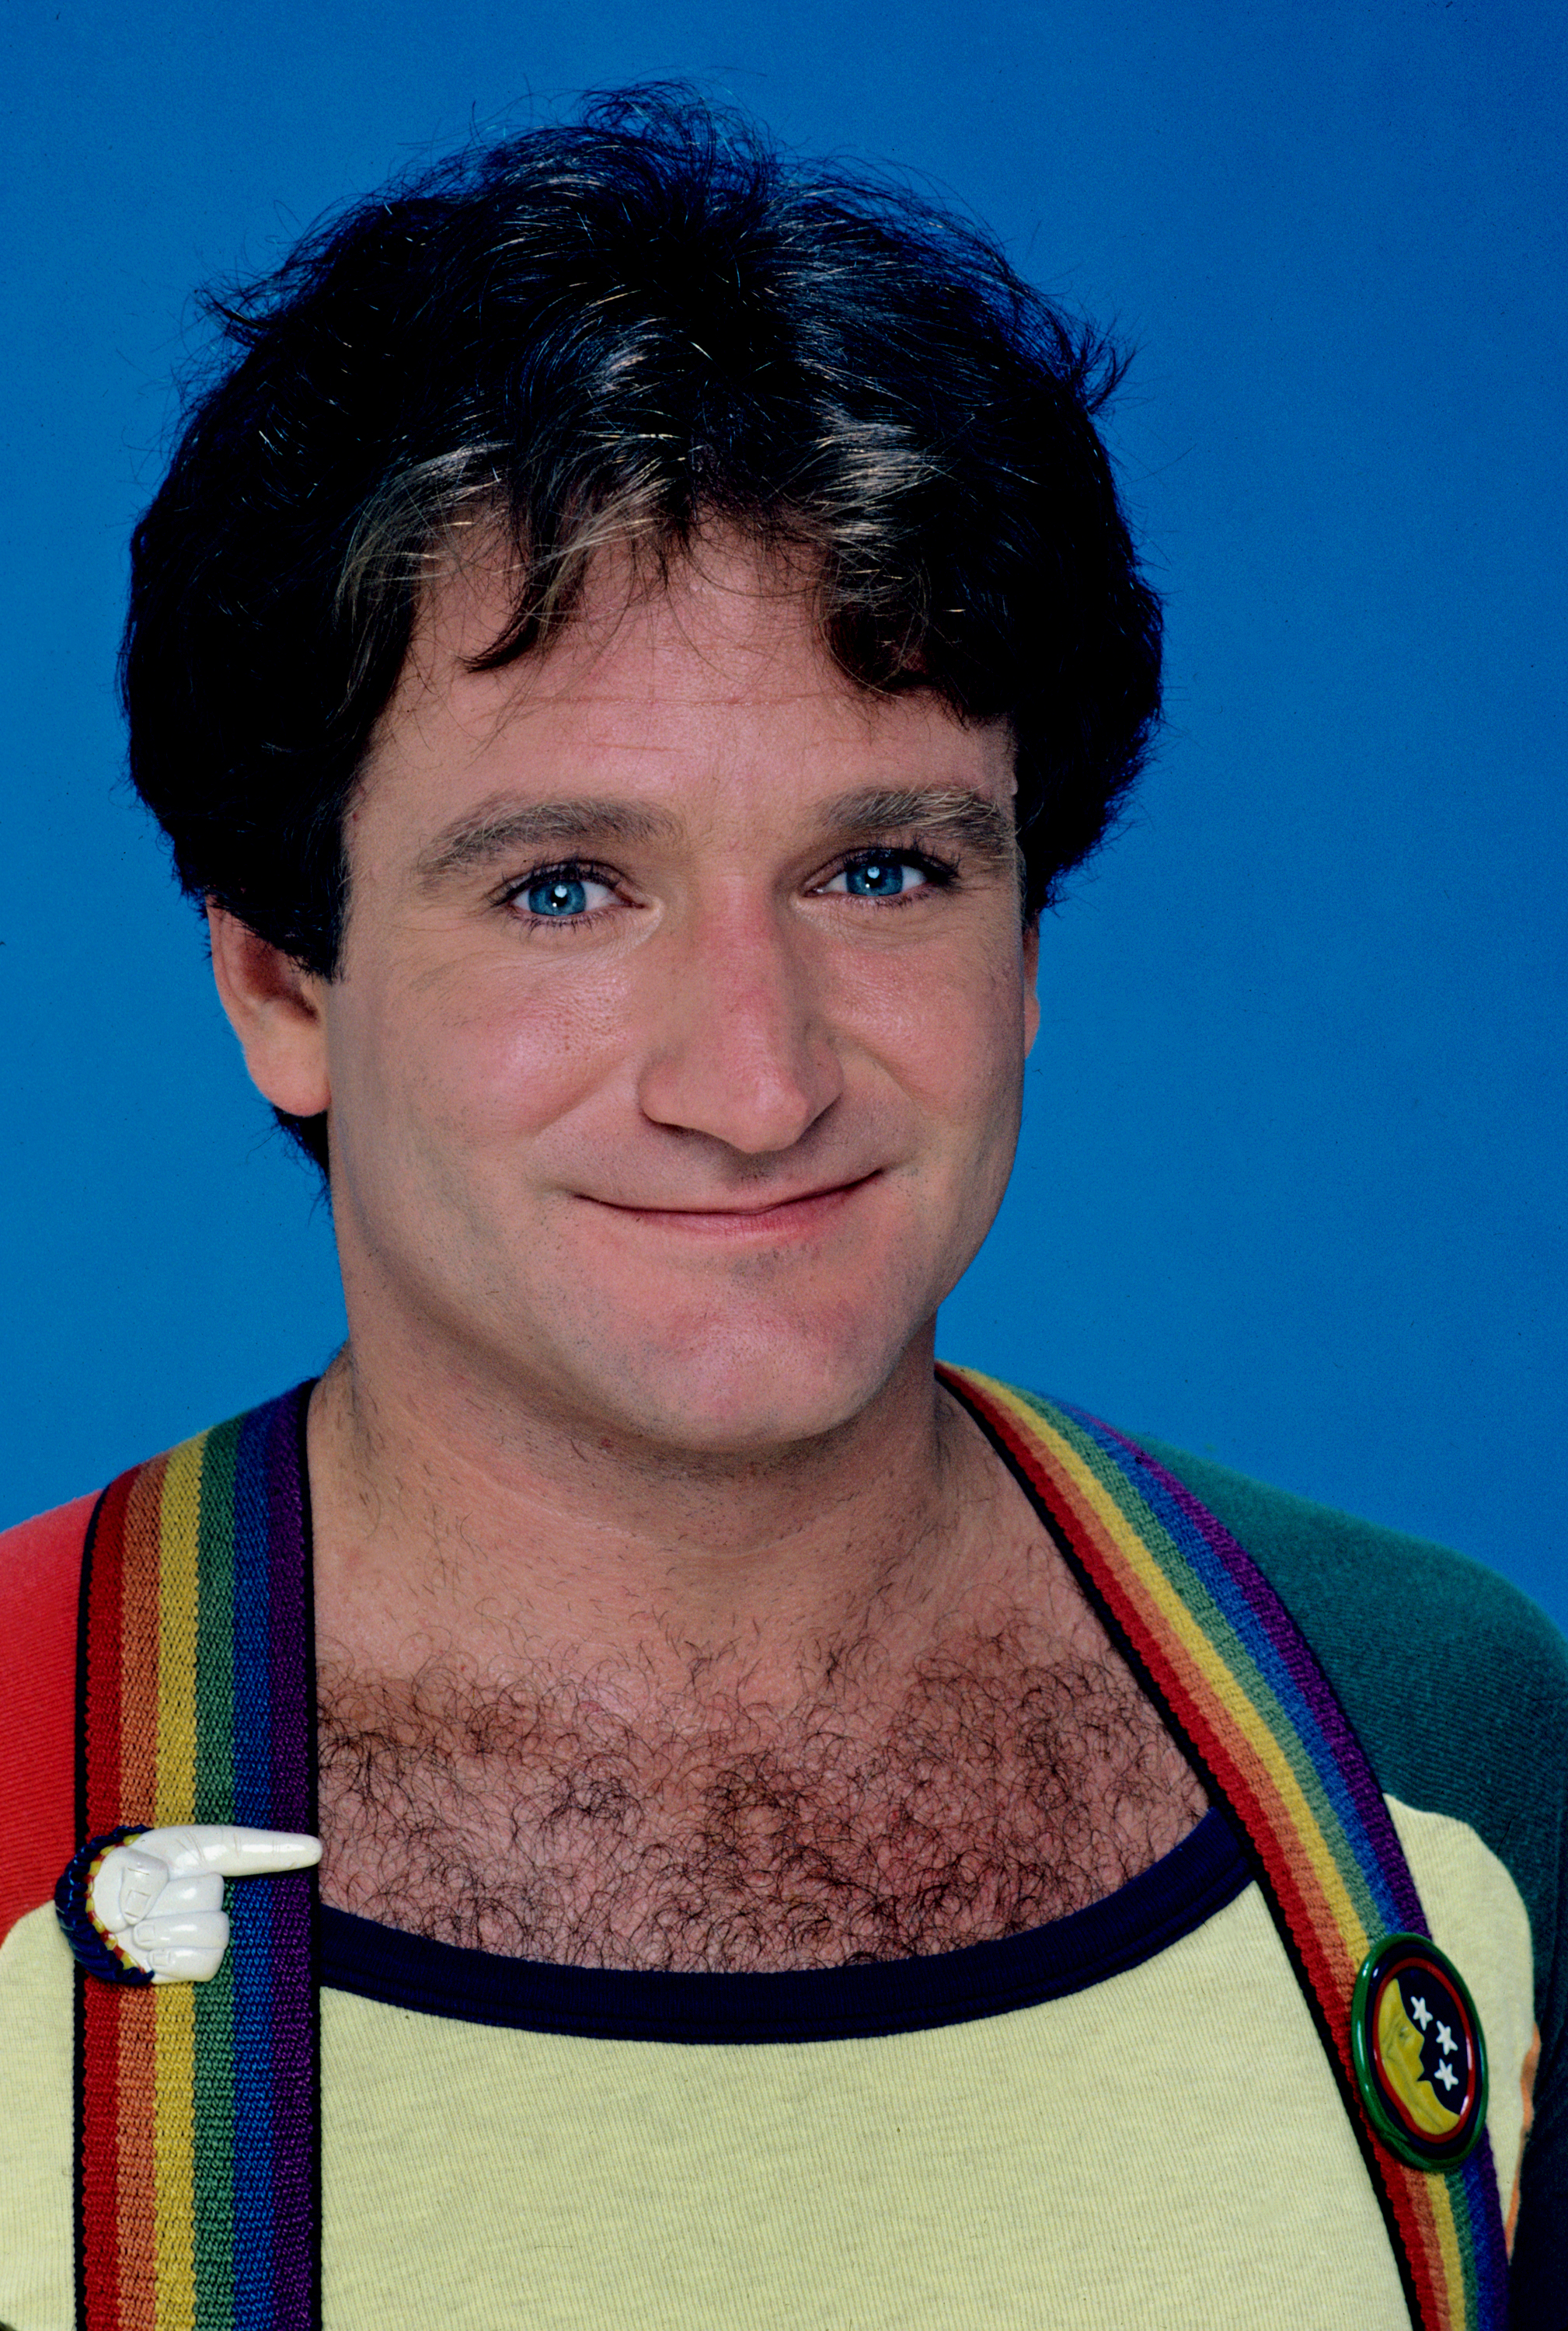 Robin Williams pictured in season four of the TV show, "Mork & Mindy," in 1981 | Source: Getty Images